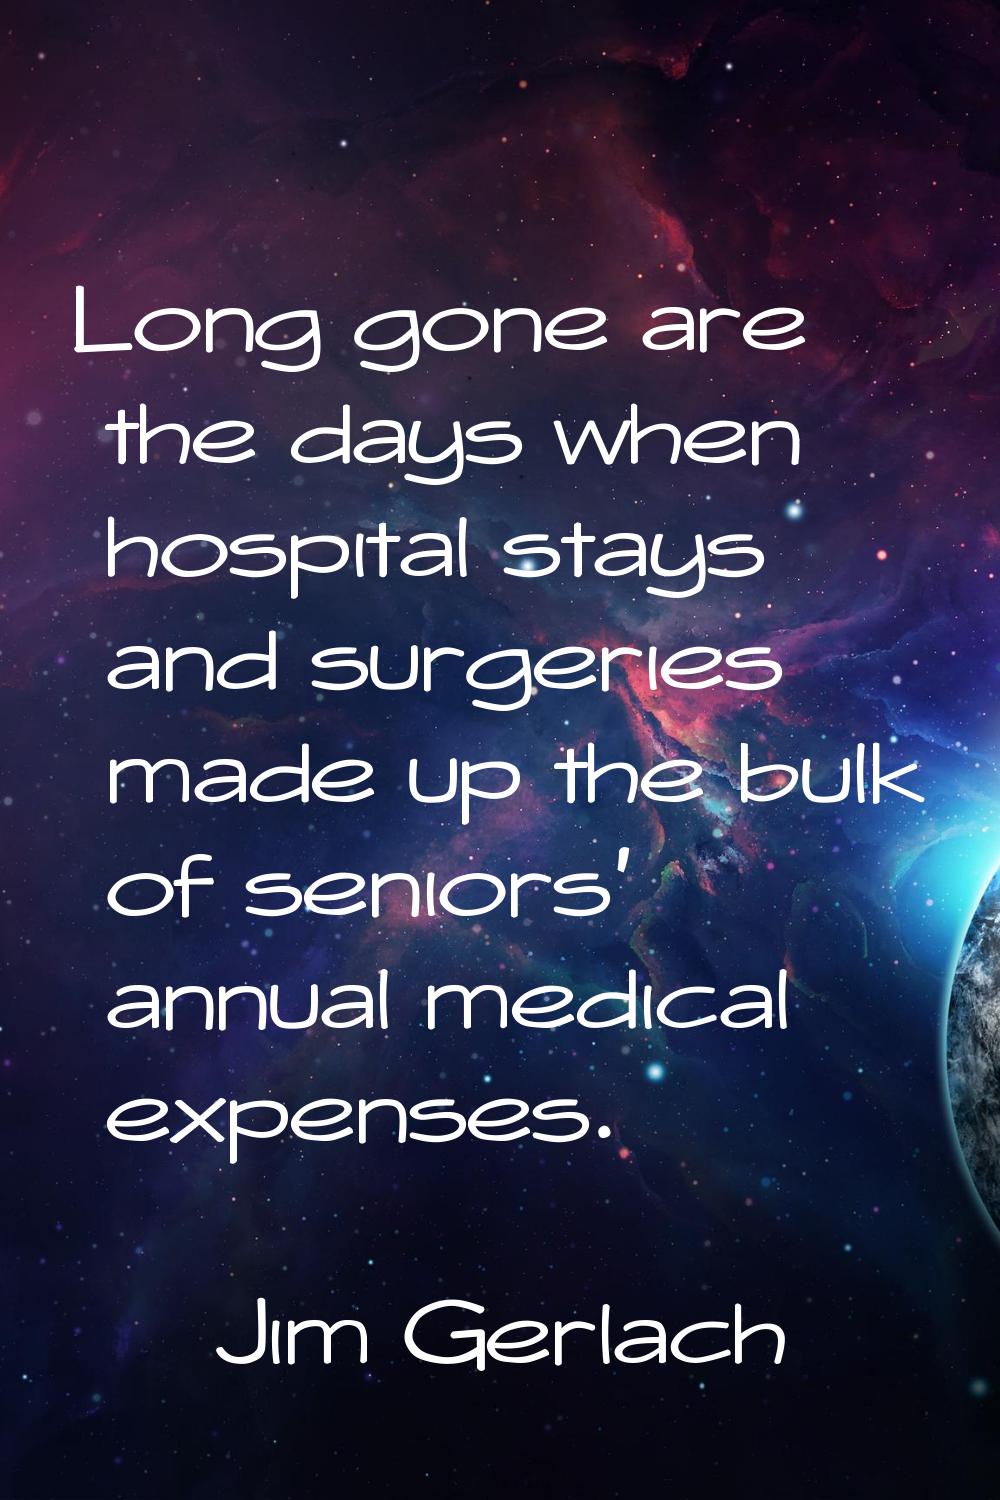 Long gone are the days when hospital stays and surgeries made up the bulk of seniors' annual medica